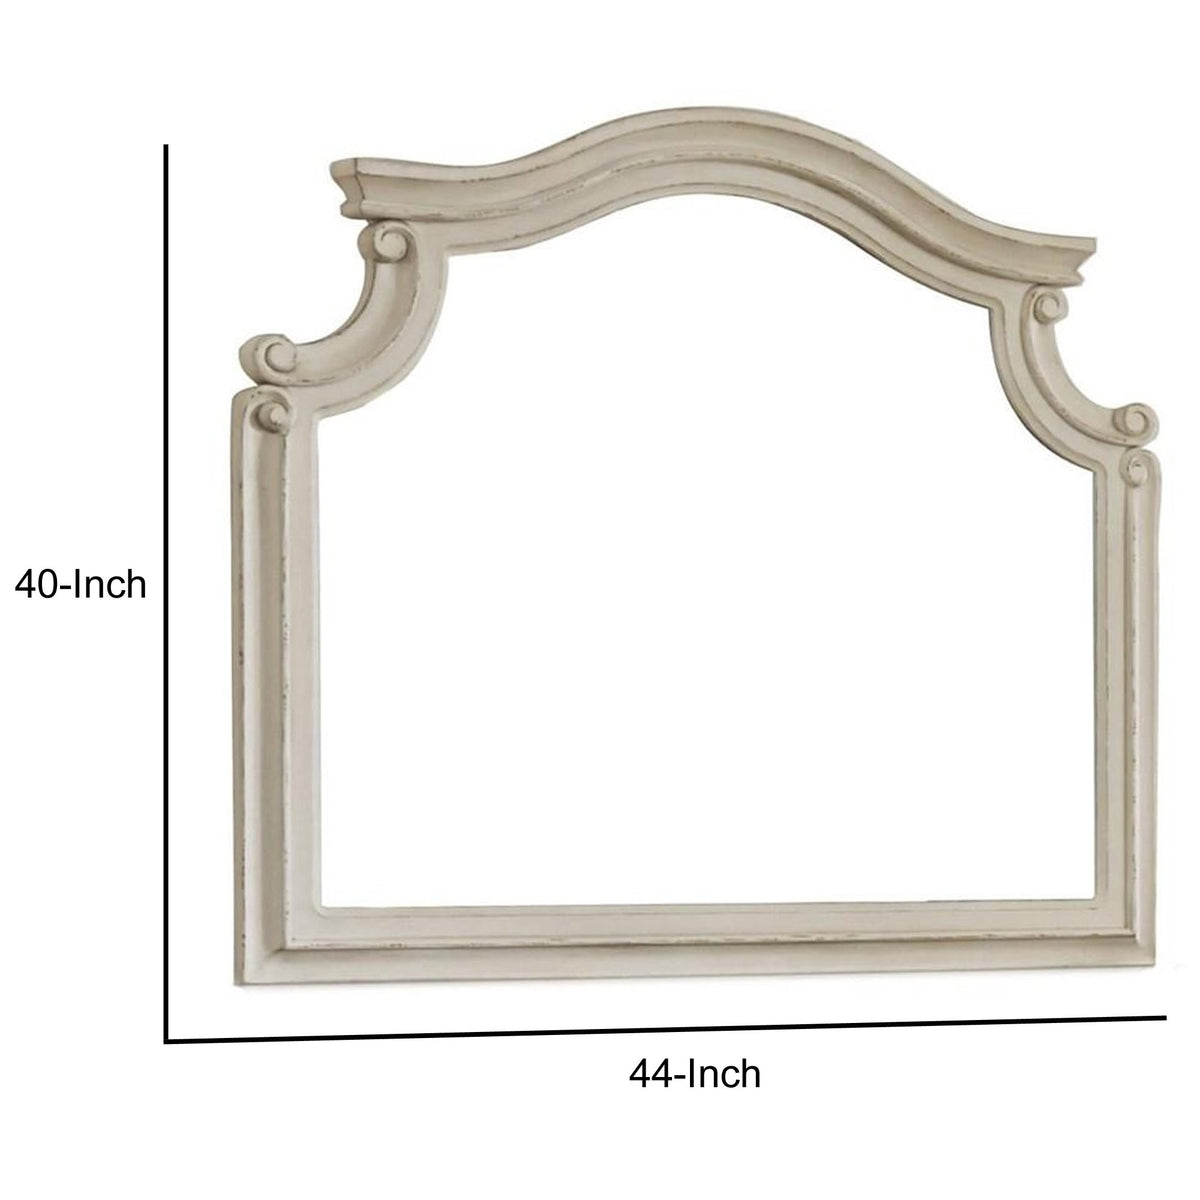 Scalloped Top Wood Encased Mirror with Molded Details, Antique White - BM227370